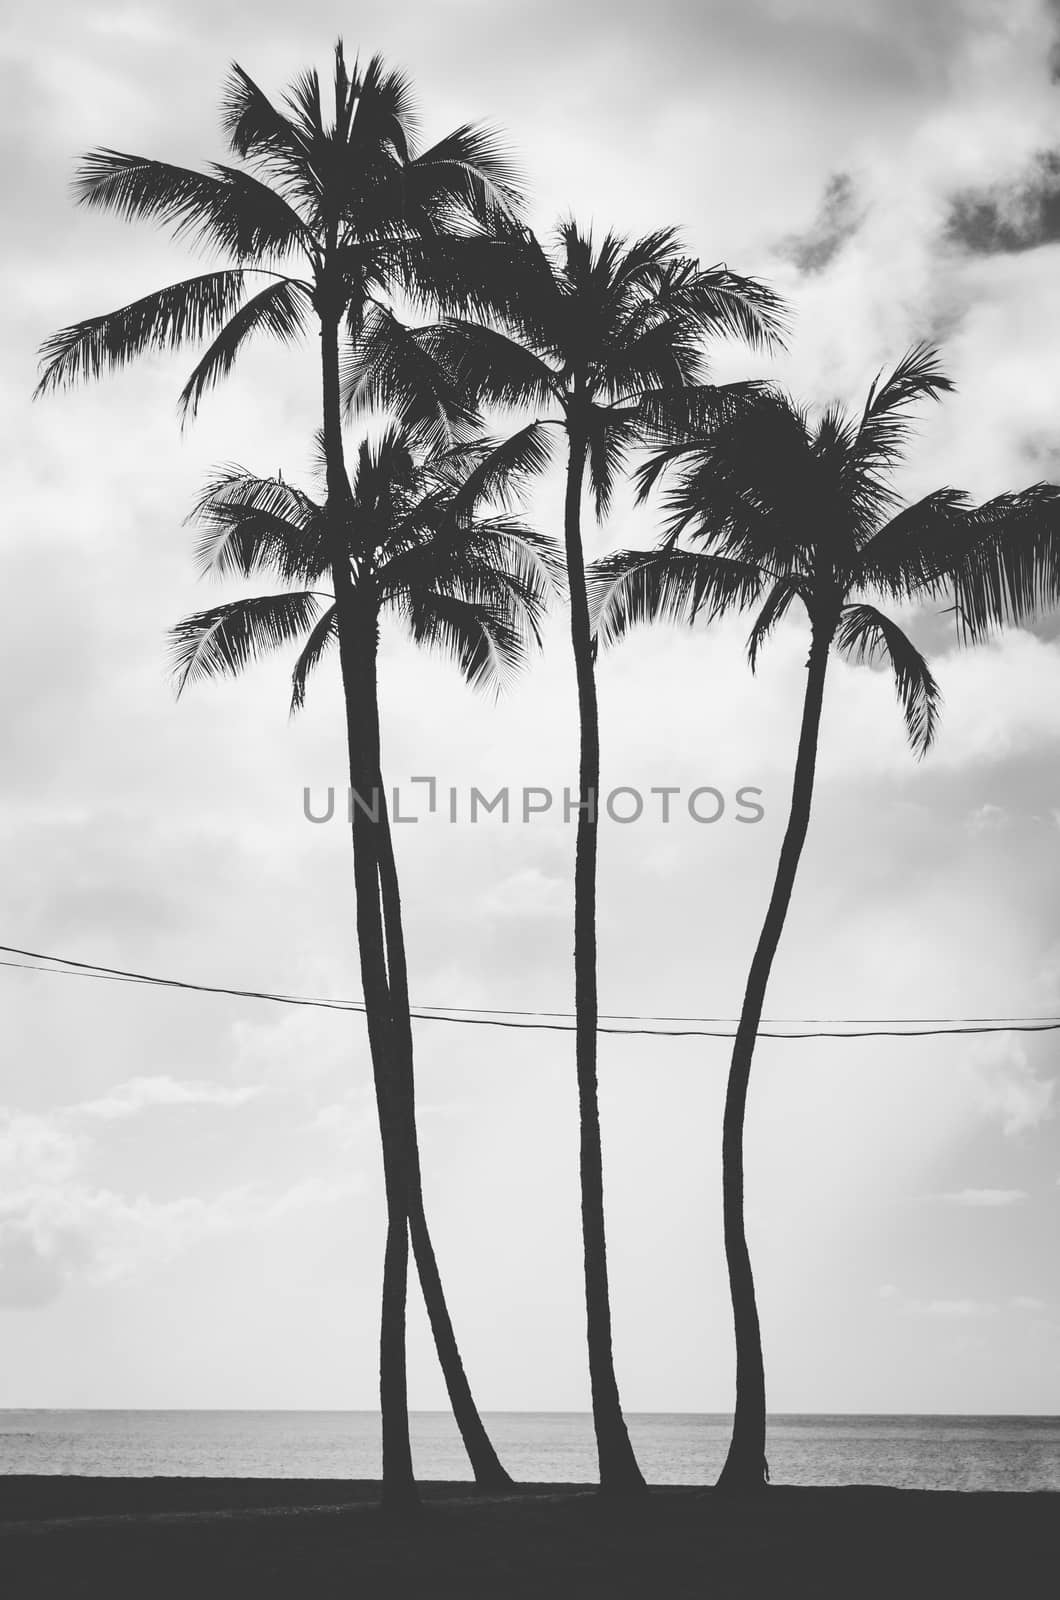 Four palm trees aligned and crossed by electric wires in Hawaii, US by mikelju